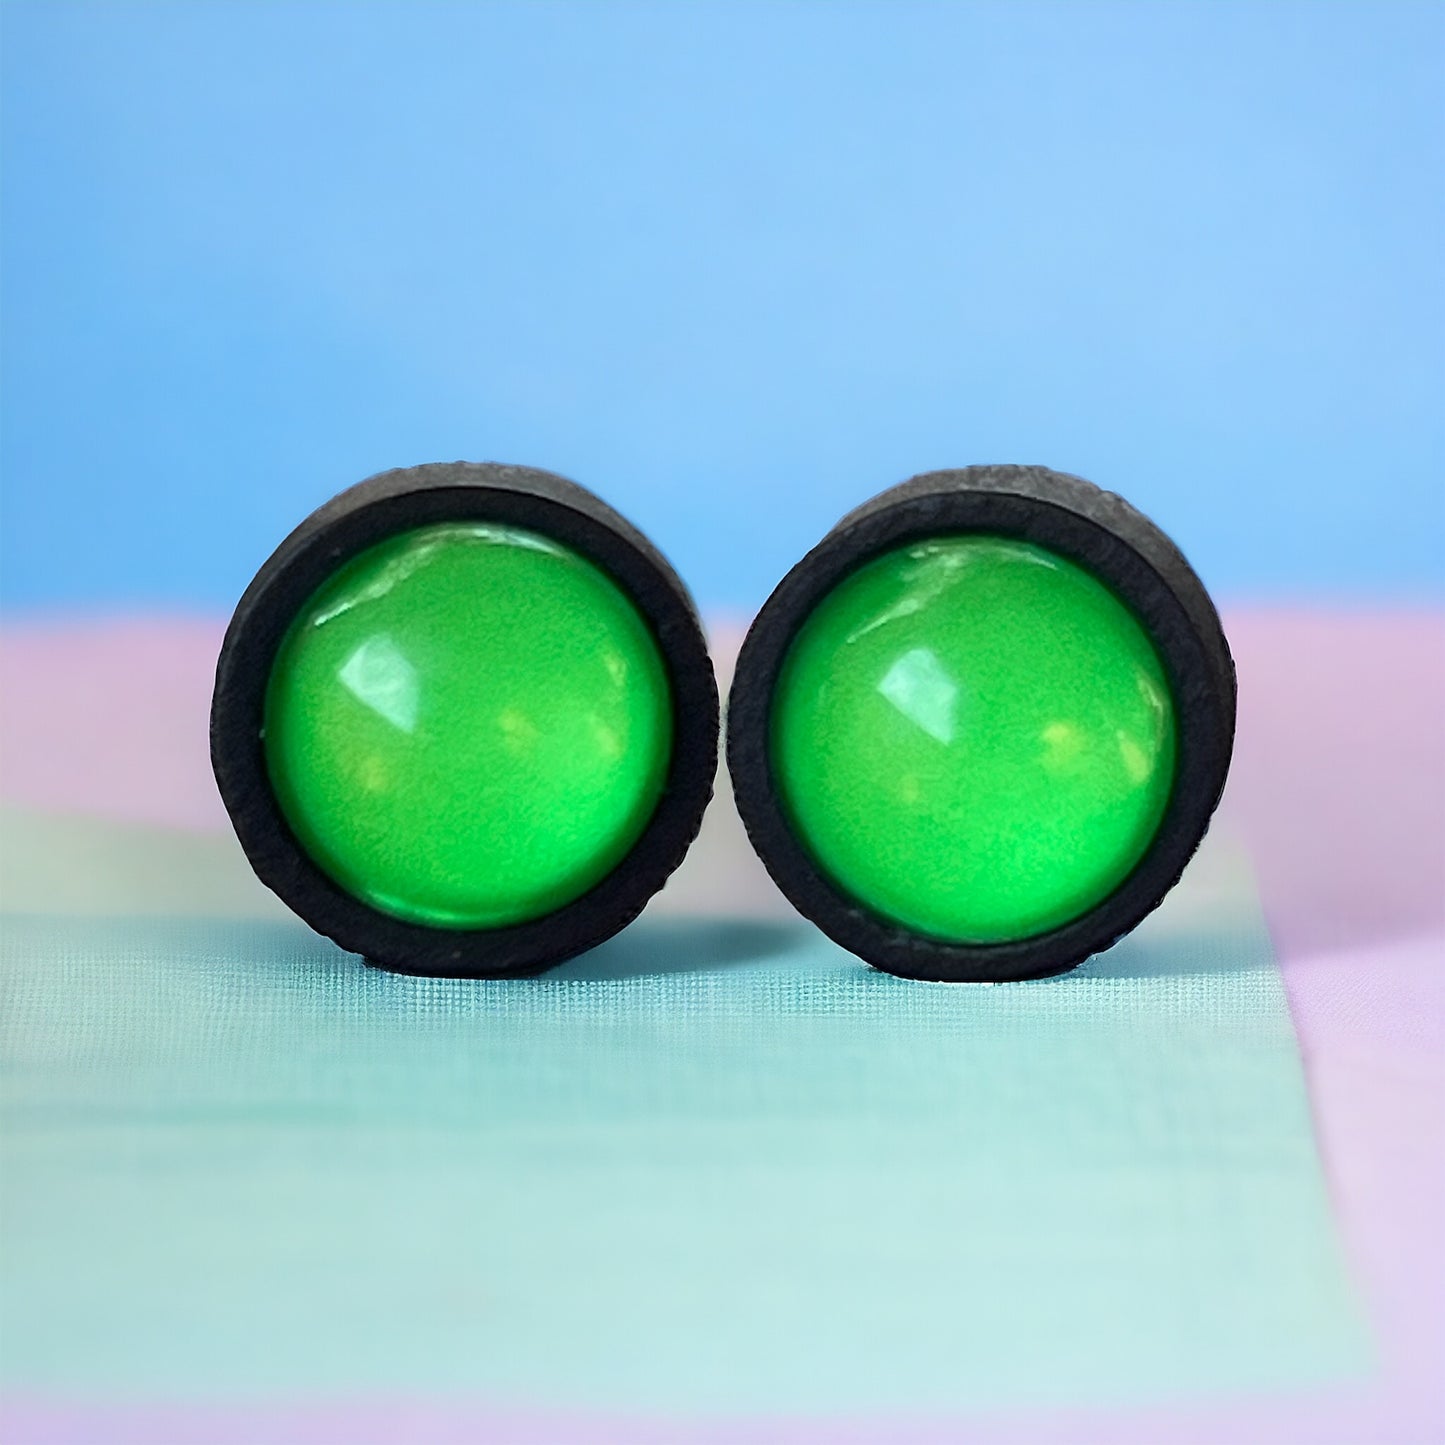 Bright Green & Black Wood Earring Studs - Vibrant and Stylish Accessories